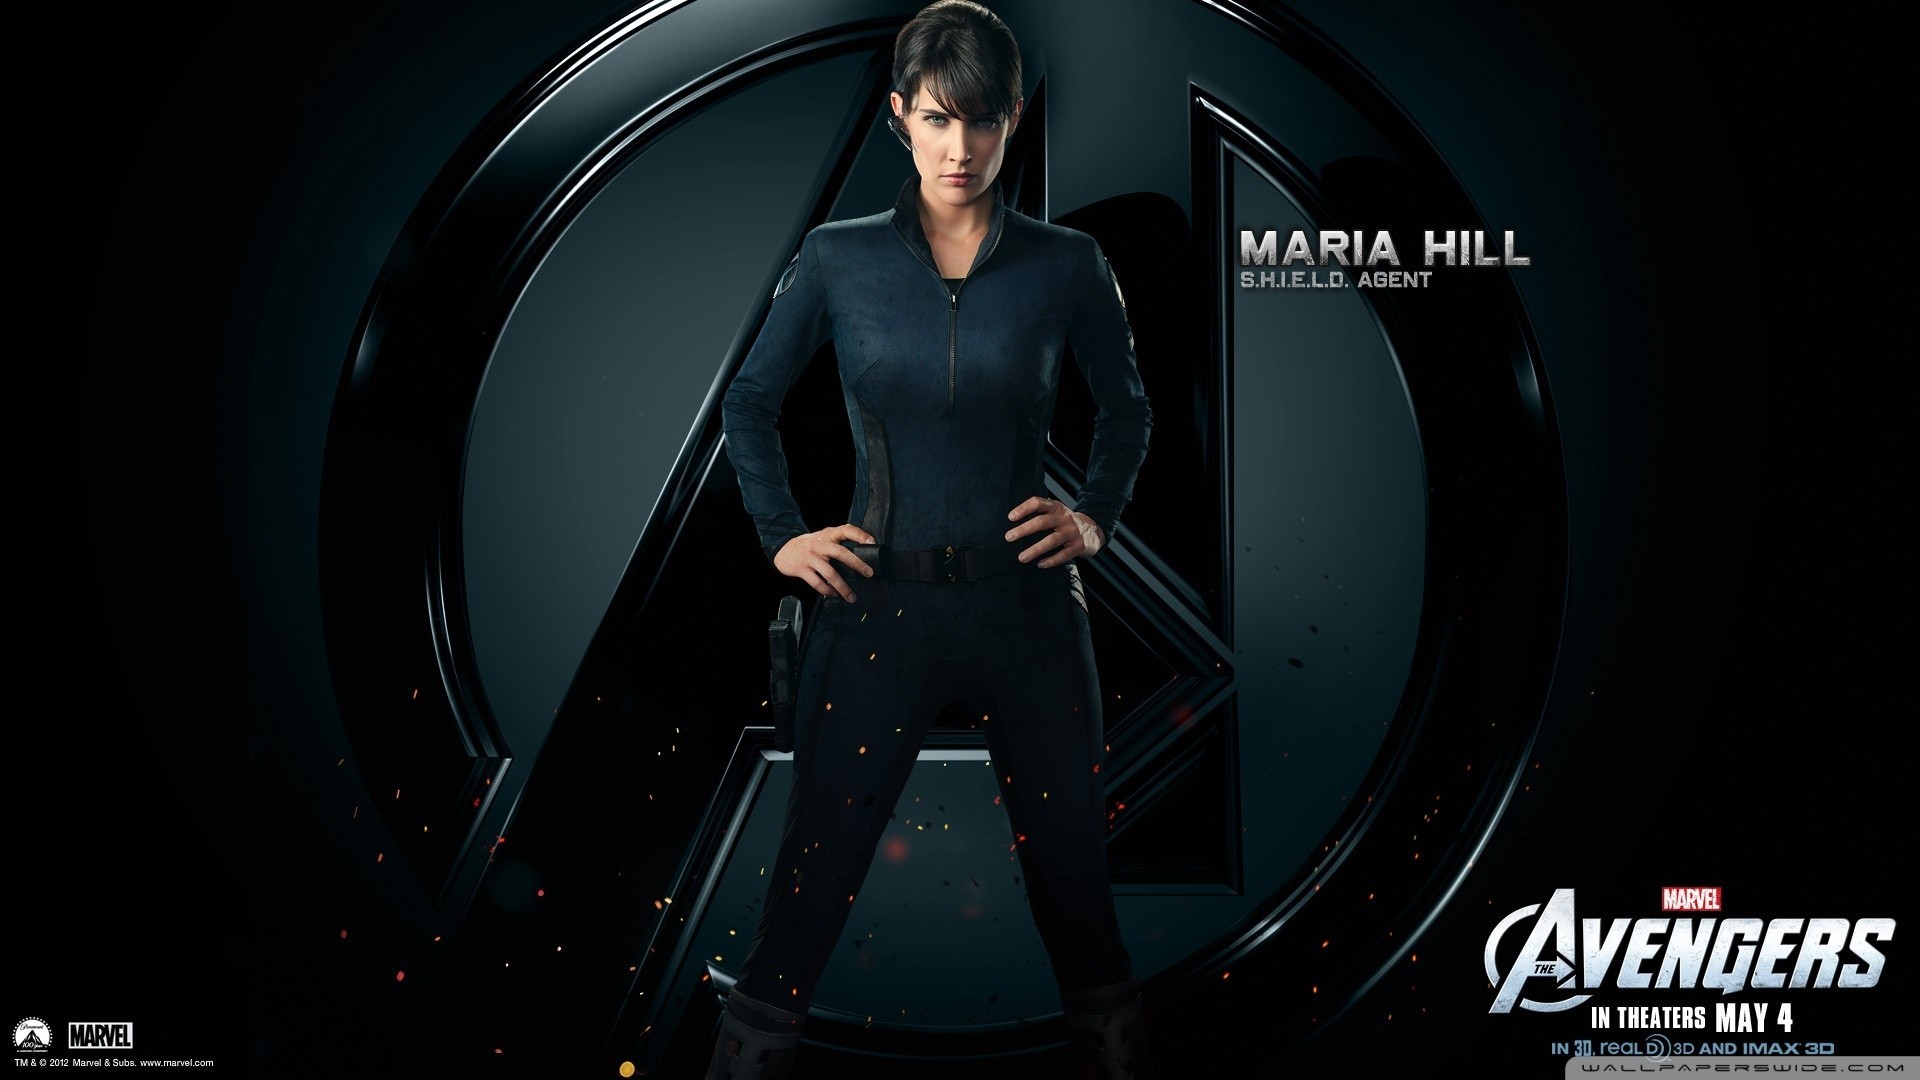 Movies The Avengers Maria Hill Cobie Smulders S H I E L D The Avengers S H I E L D Maria Hill Cobie  1920x1080